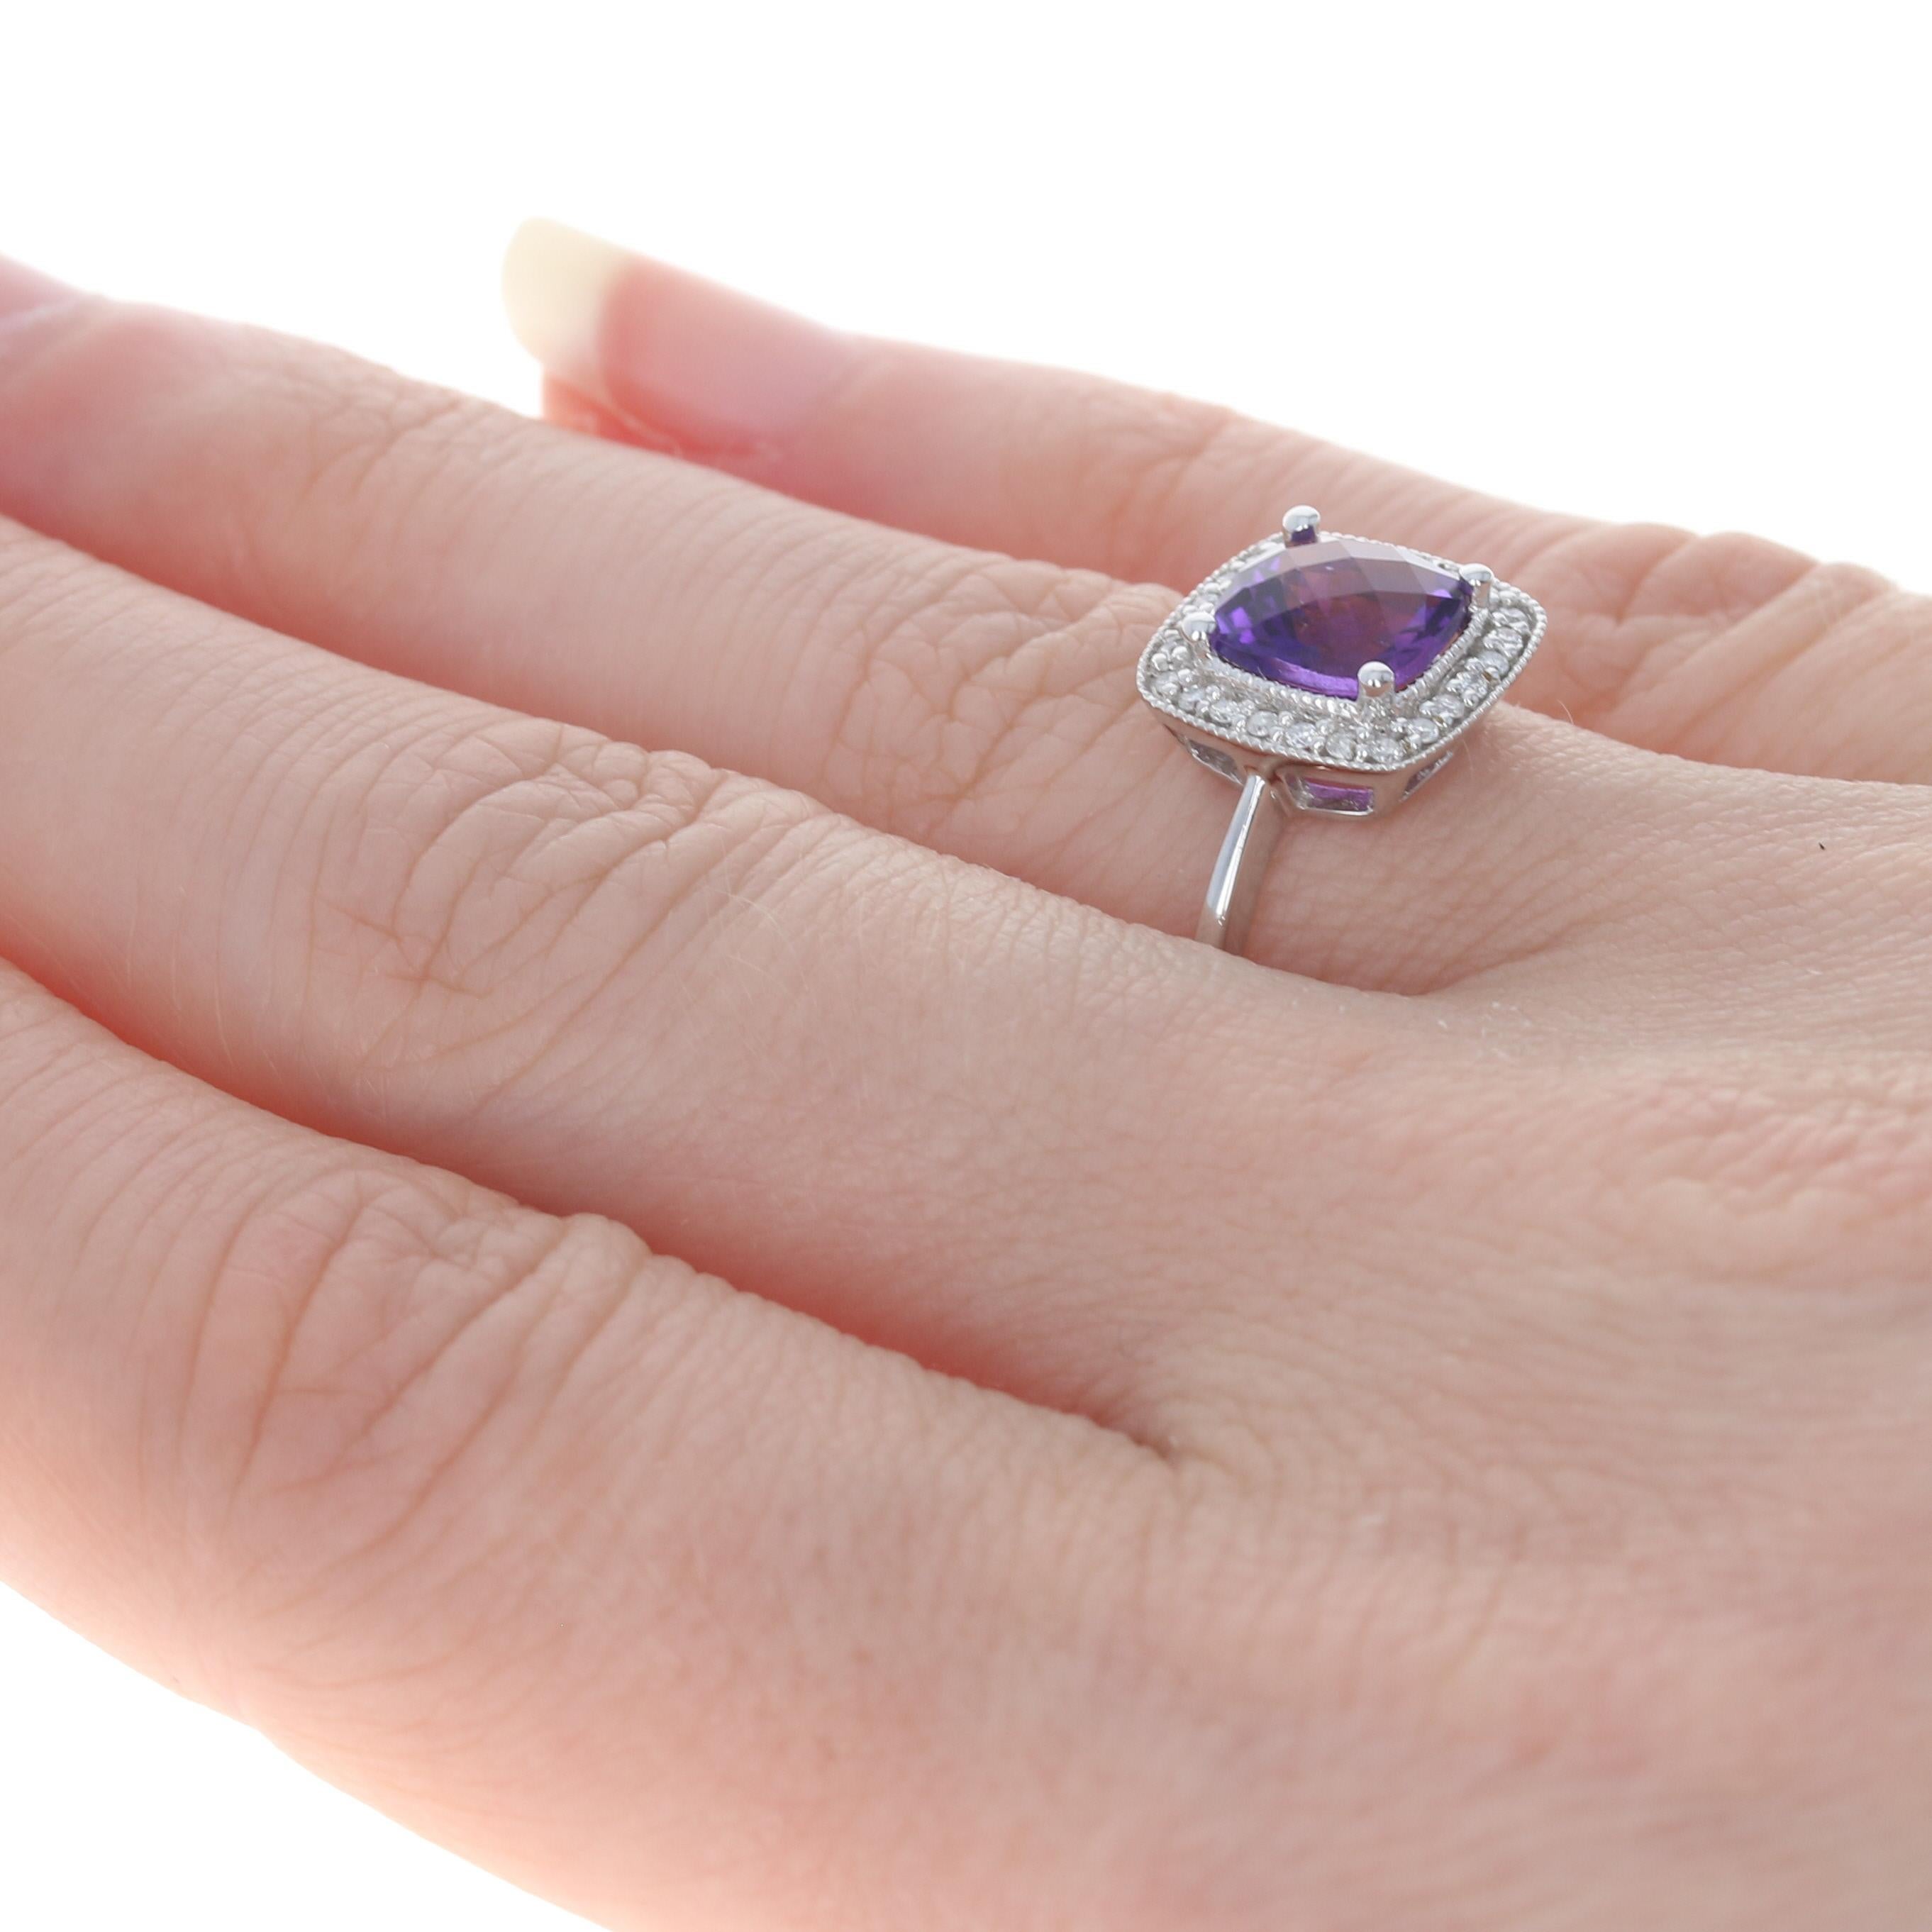 New Amethyst & Diamond Halo Ring, 10k White Gold Checkerboard Cushion 1.57ctw In New Condition For Sale In Greensboro, NC